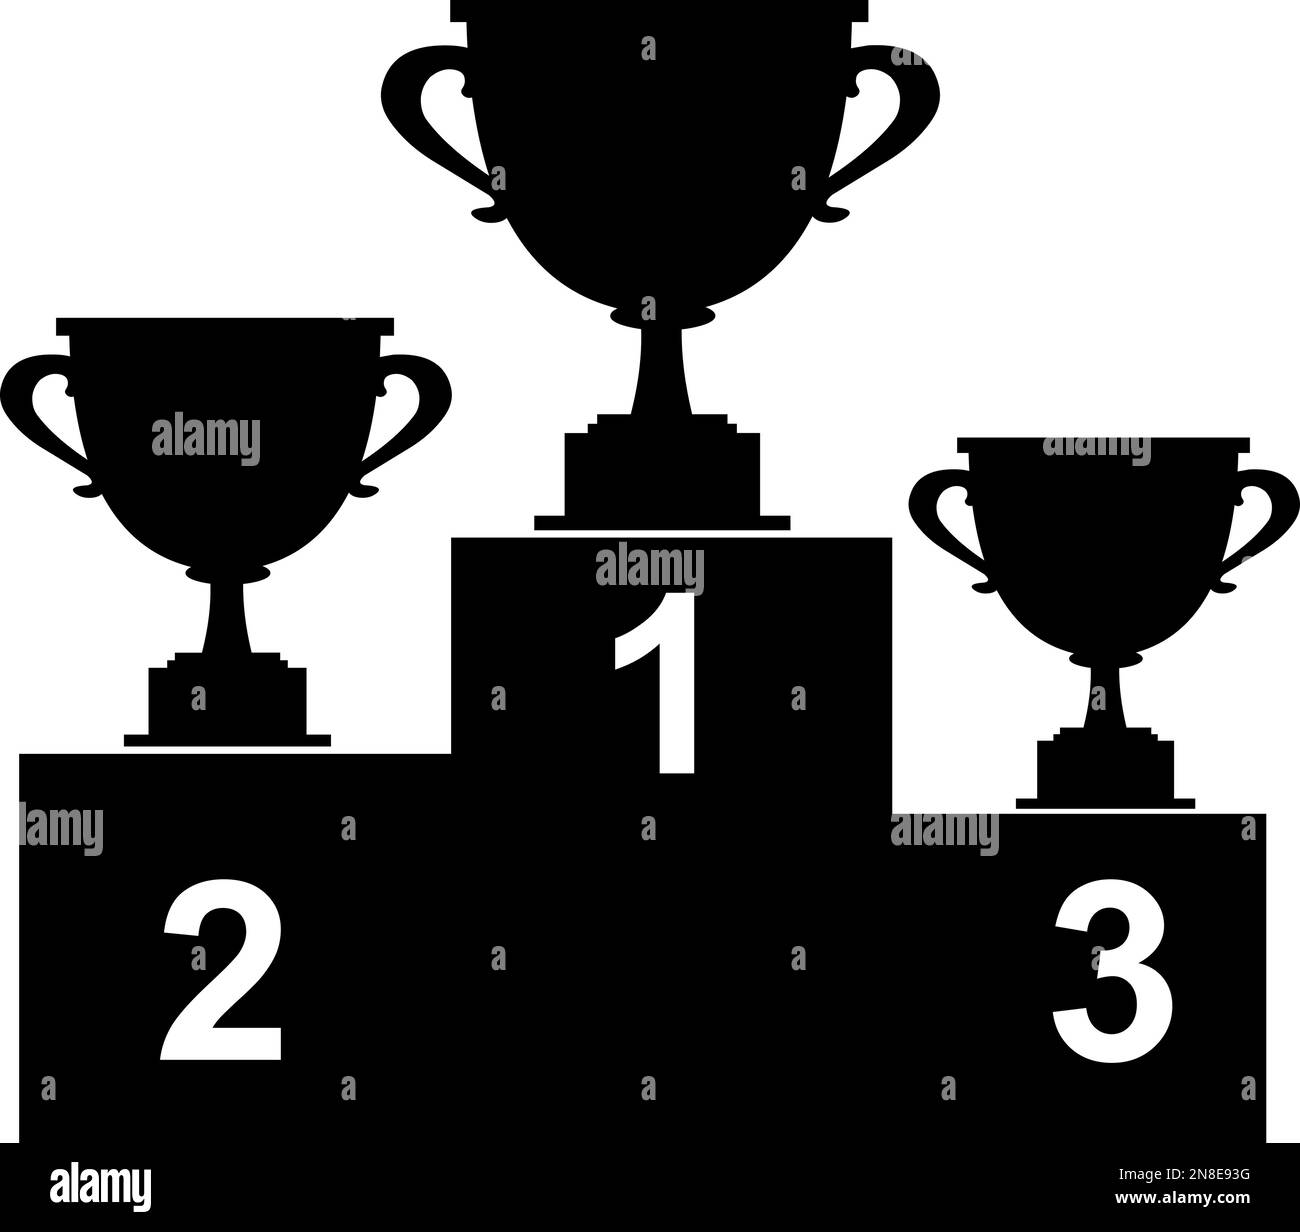 vector illustration icon of first, second and third place  of the silhouette of trophy cups on a platform, designed in black and white Stock Vector